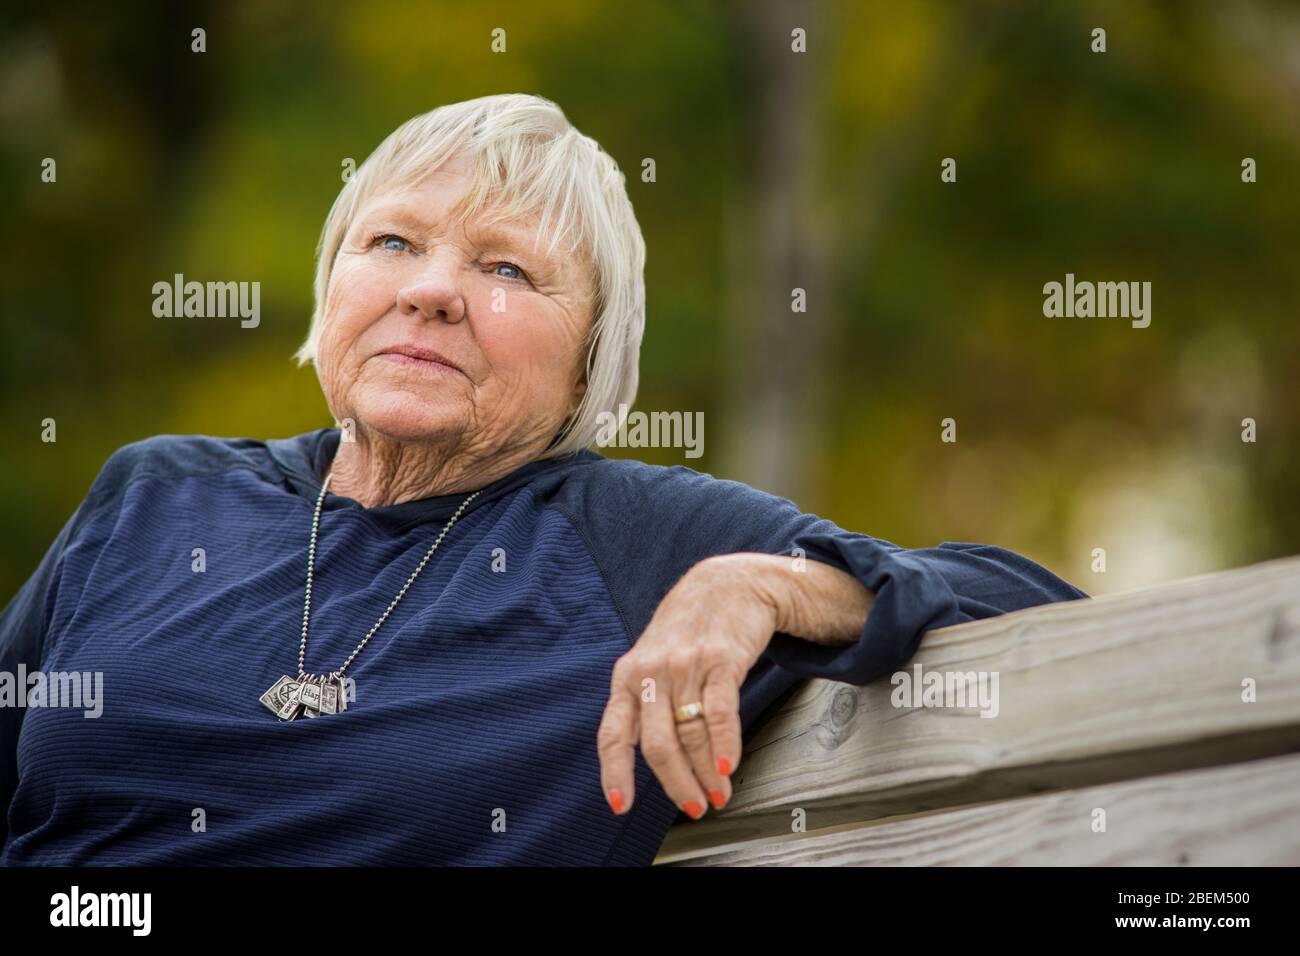 Portrait of a senior woman sitting on a bench Stock Photo